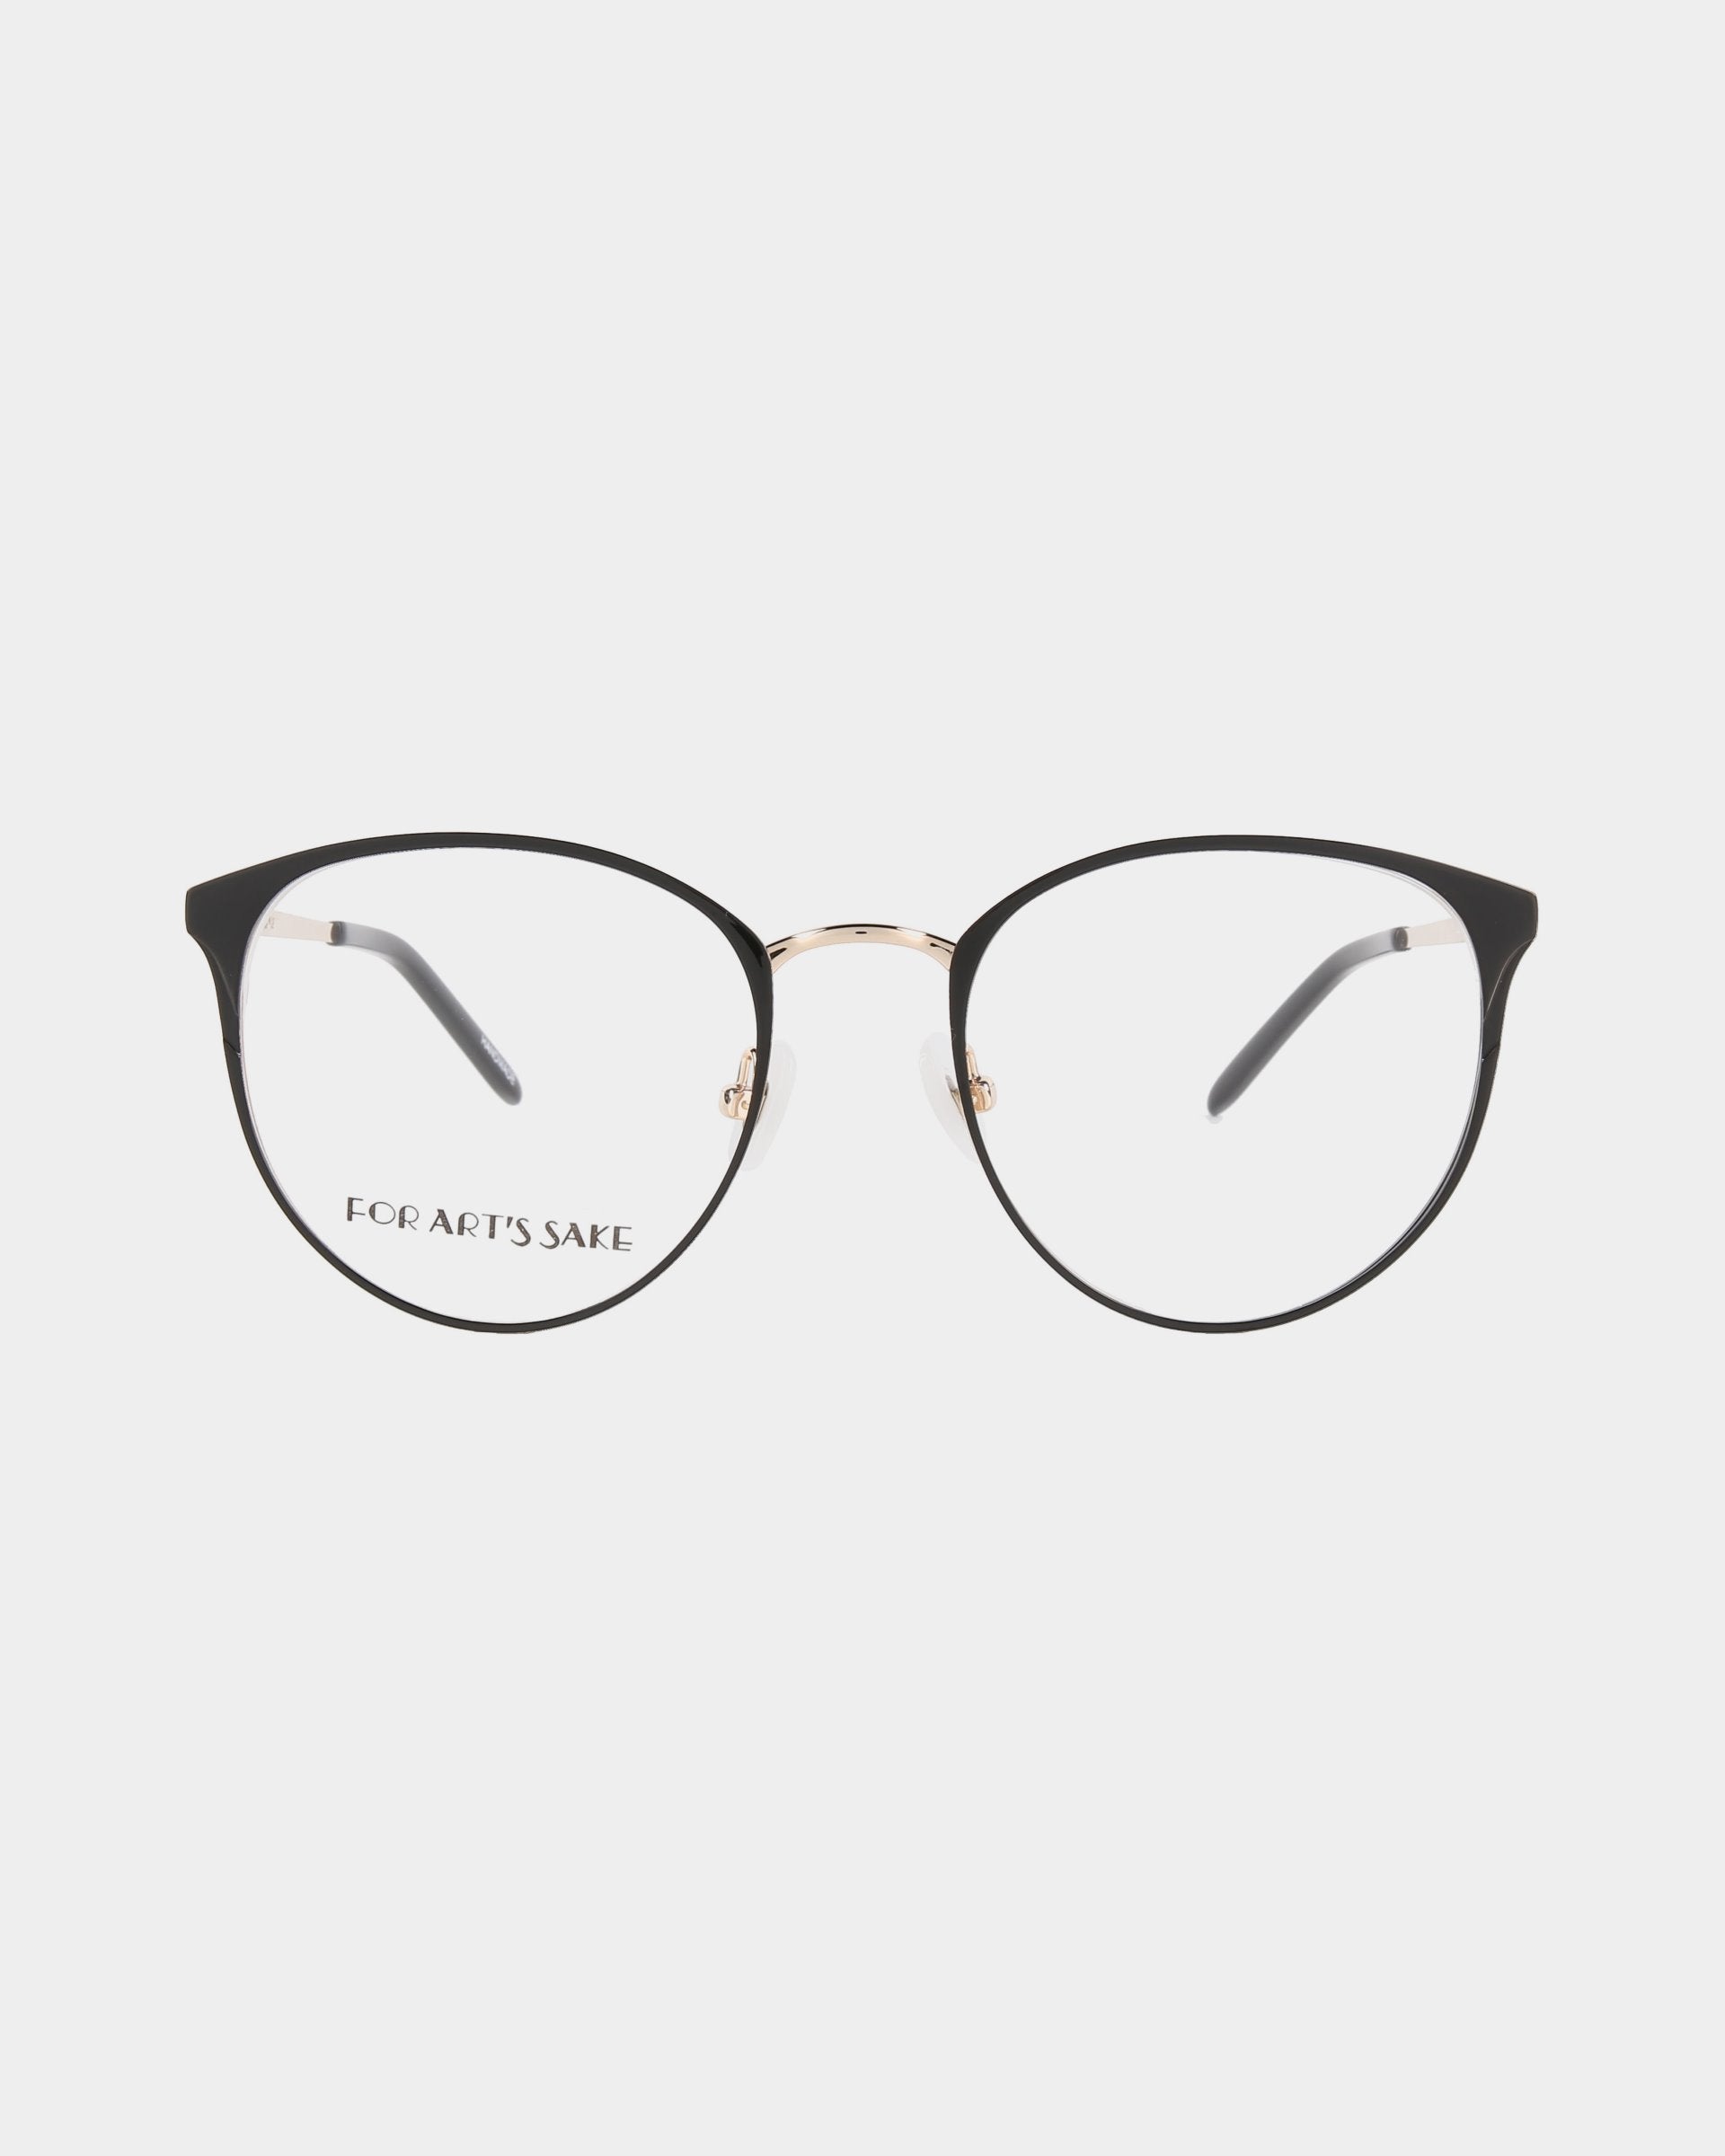 A pair of thin-rimmed, round eyeglasses with black and gold frames is displayed against a white background. The left lens includes the text &quot;For Art&#39;s Sake.&quot; The design is simple and elegant, featuring blue light filter lenses to protect your eyes from digital strain. These eyeglasses are the Olivia by For Art&#39;s Sake®.